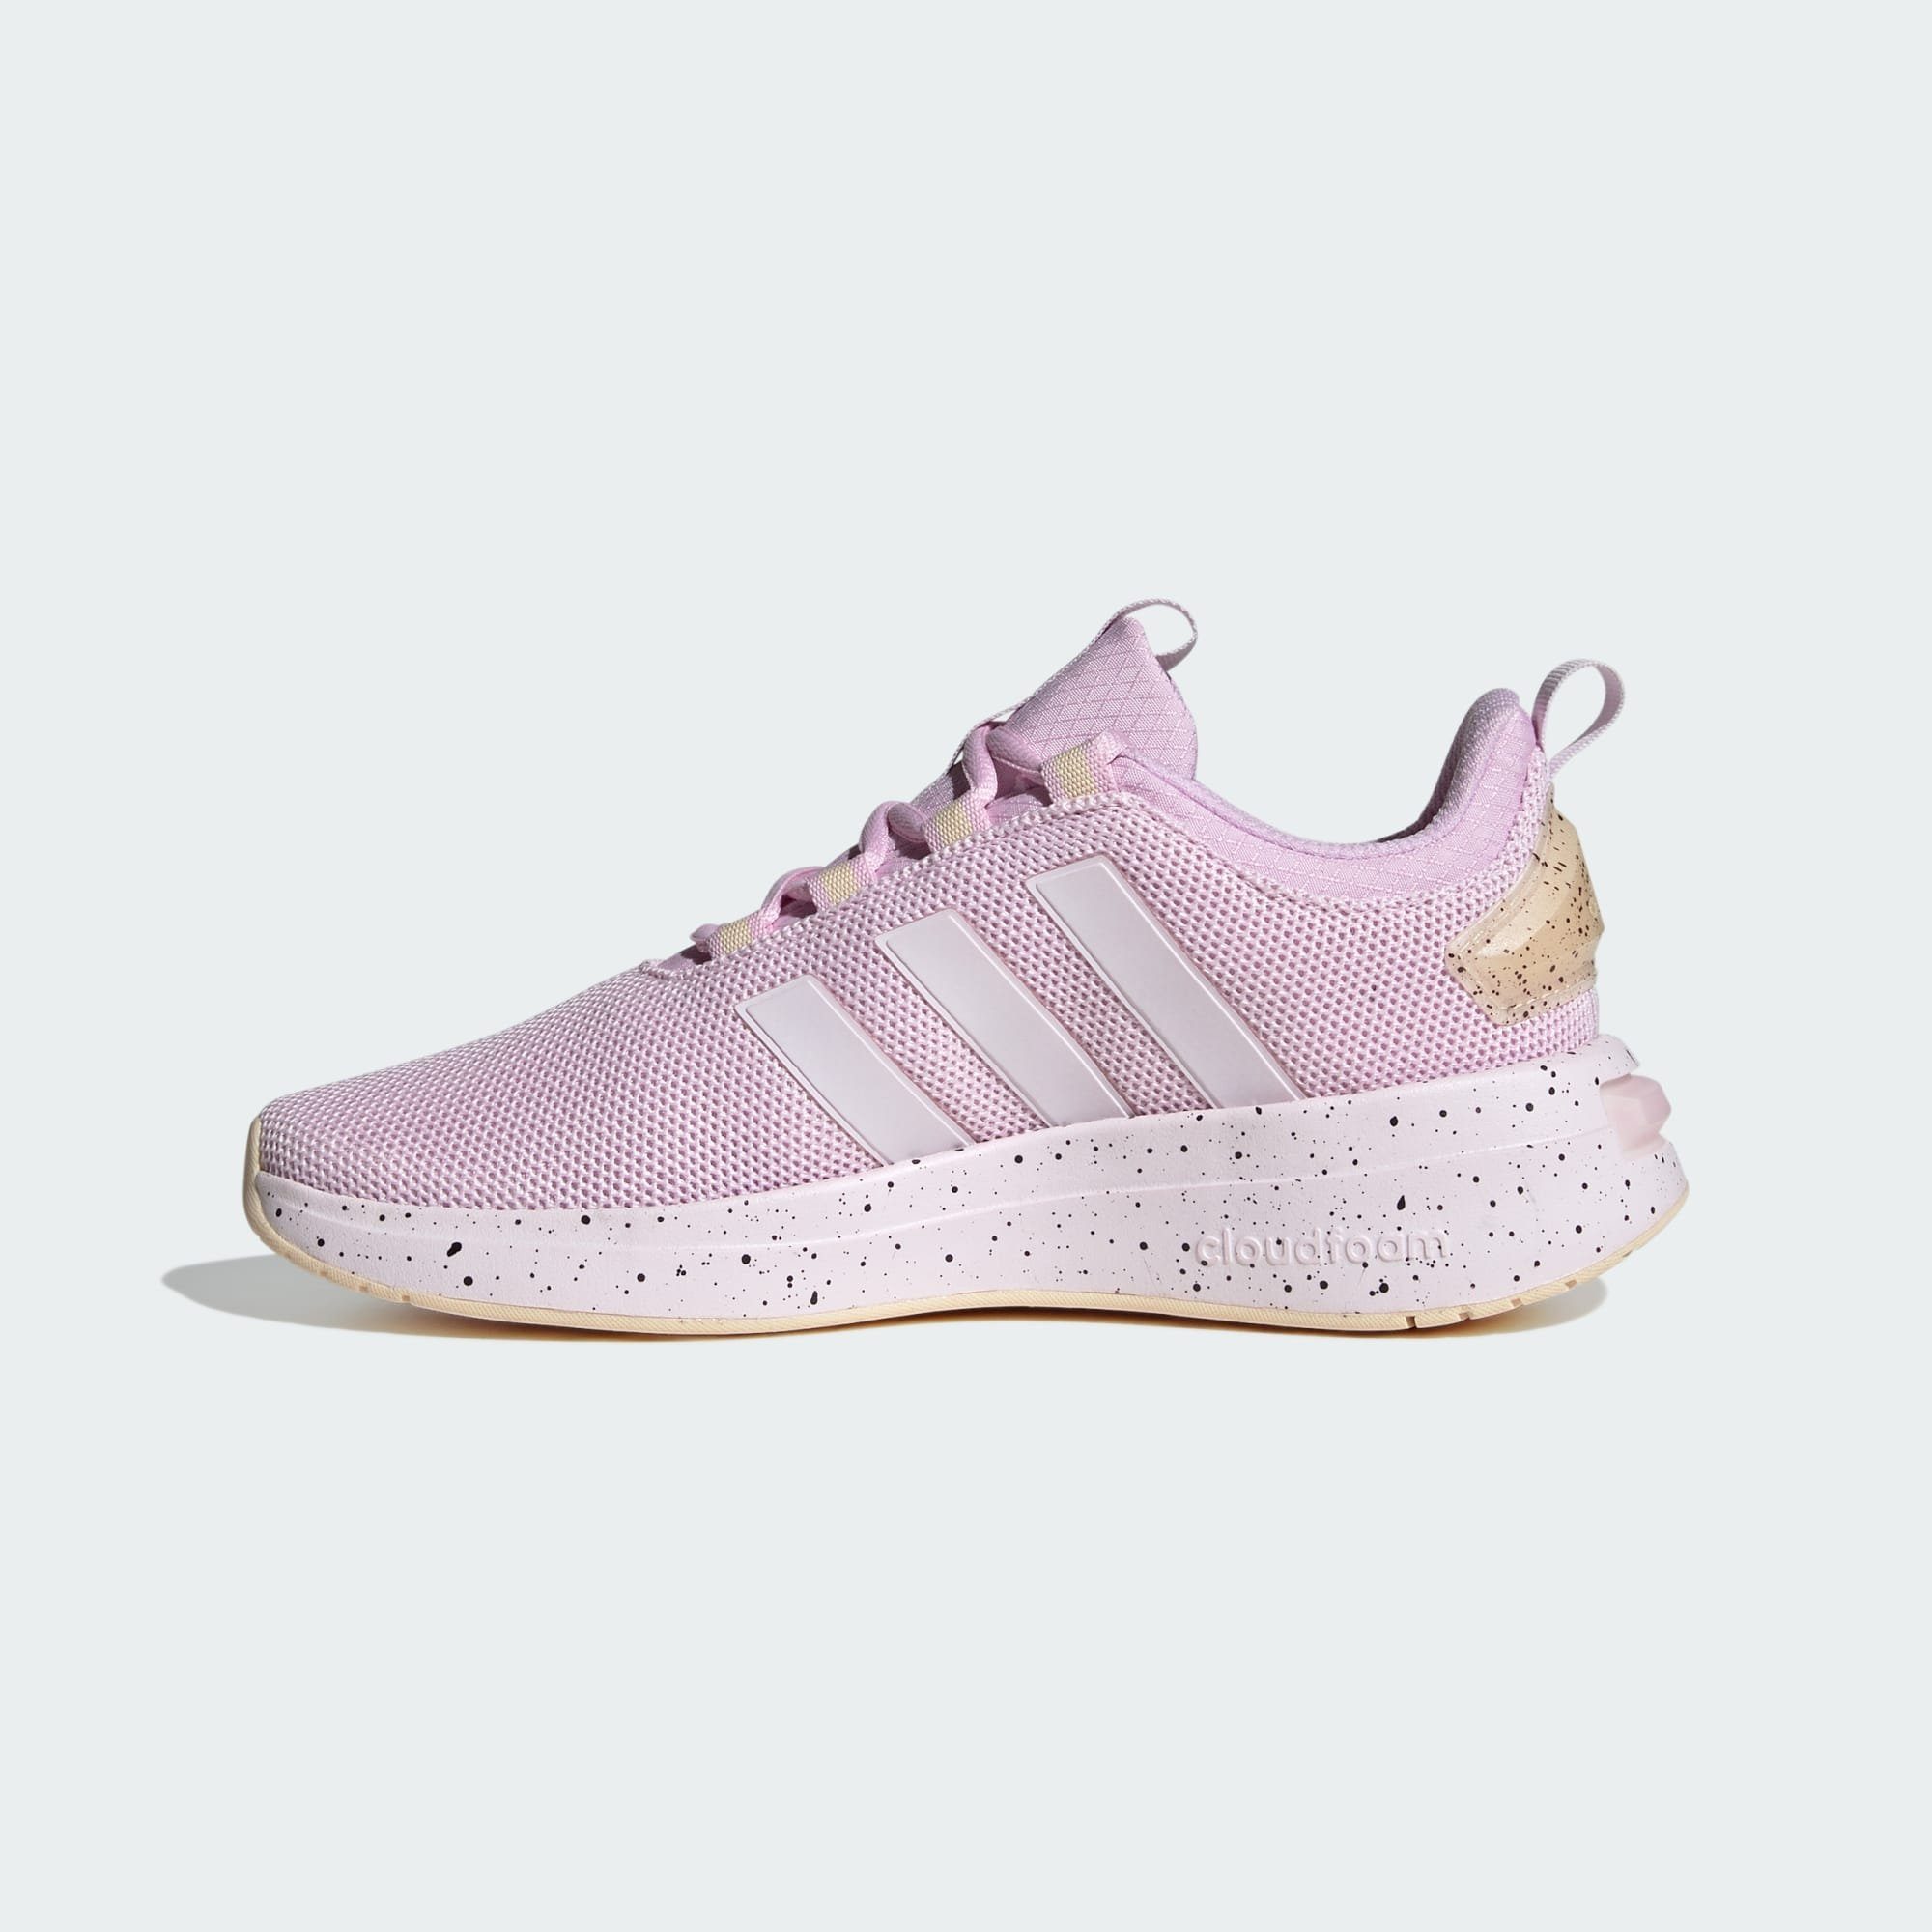 Fusion Sportswear / TR23 Pink Almost Orchid RACER / Fusion Pink Sneaker adidas SCHUH